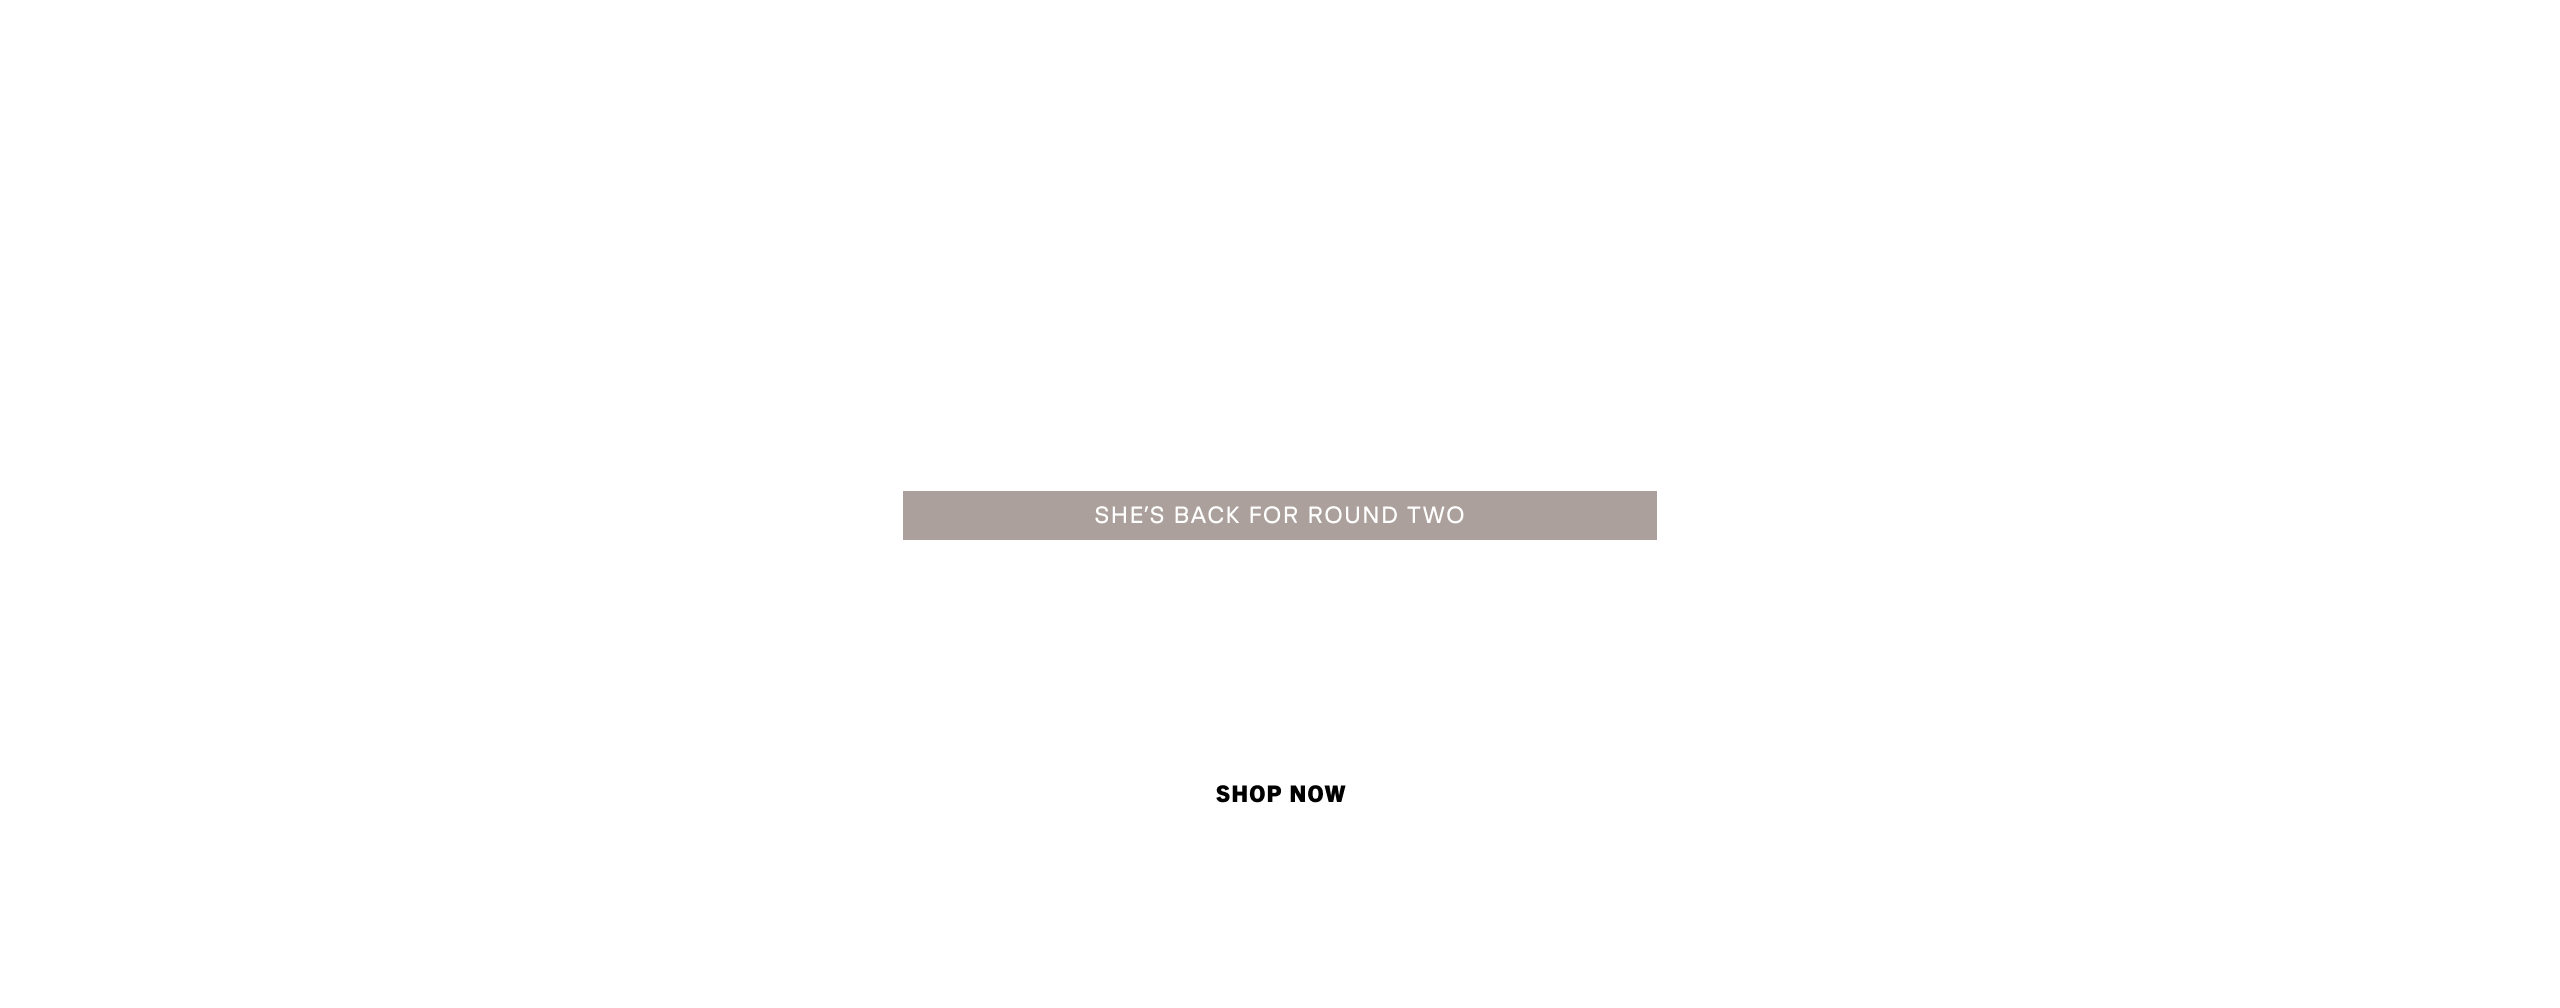 Shop the Khloe edit! She's back for round two! Click to unlock new VIP offers: 2 for $24 USD bottoms + 50% off everything.